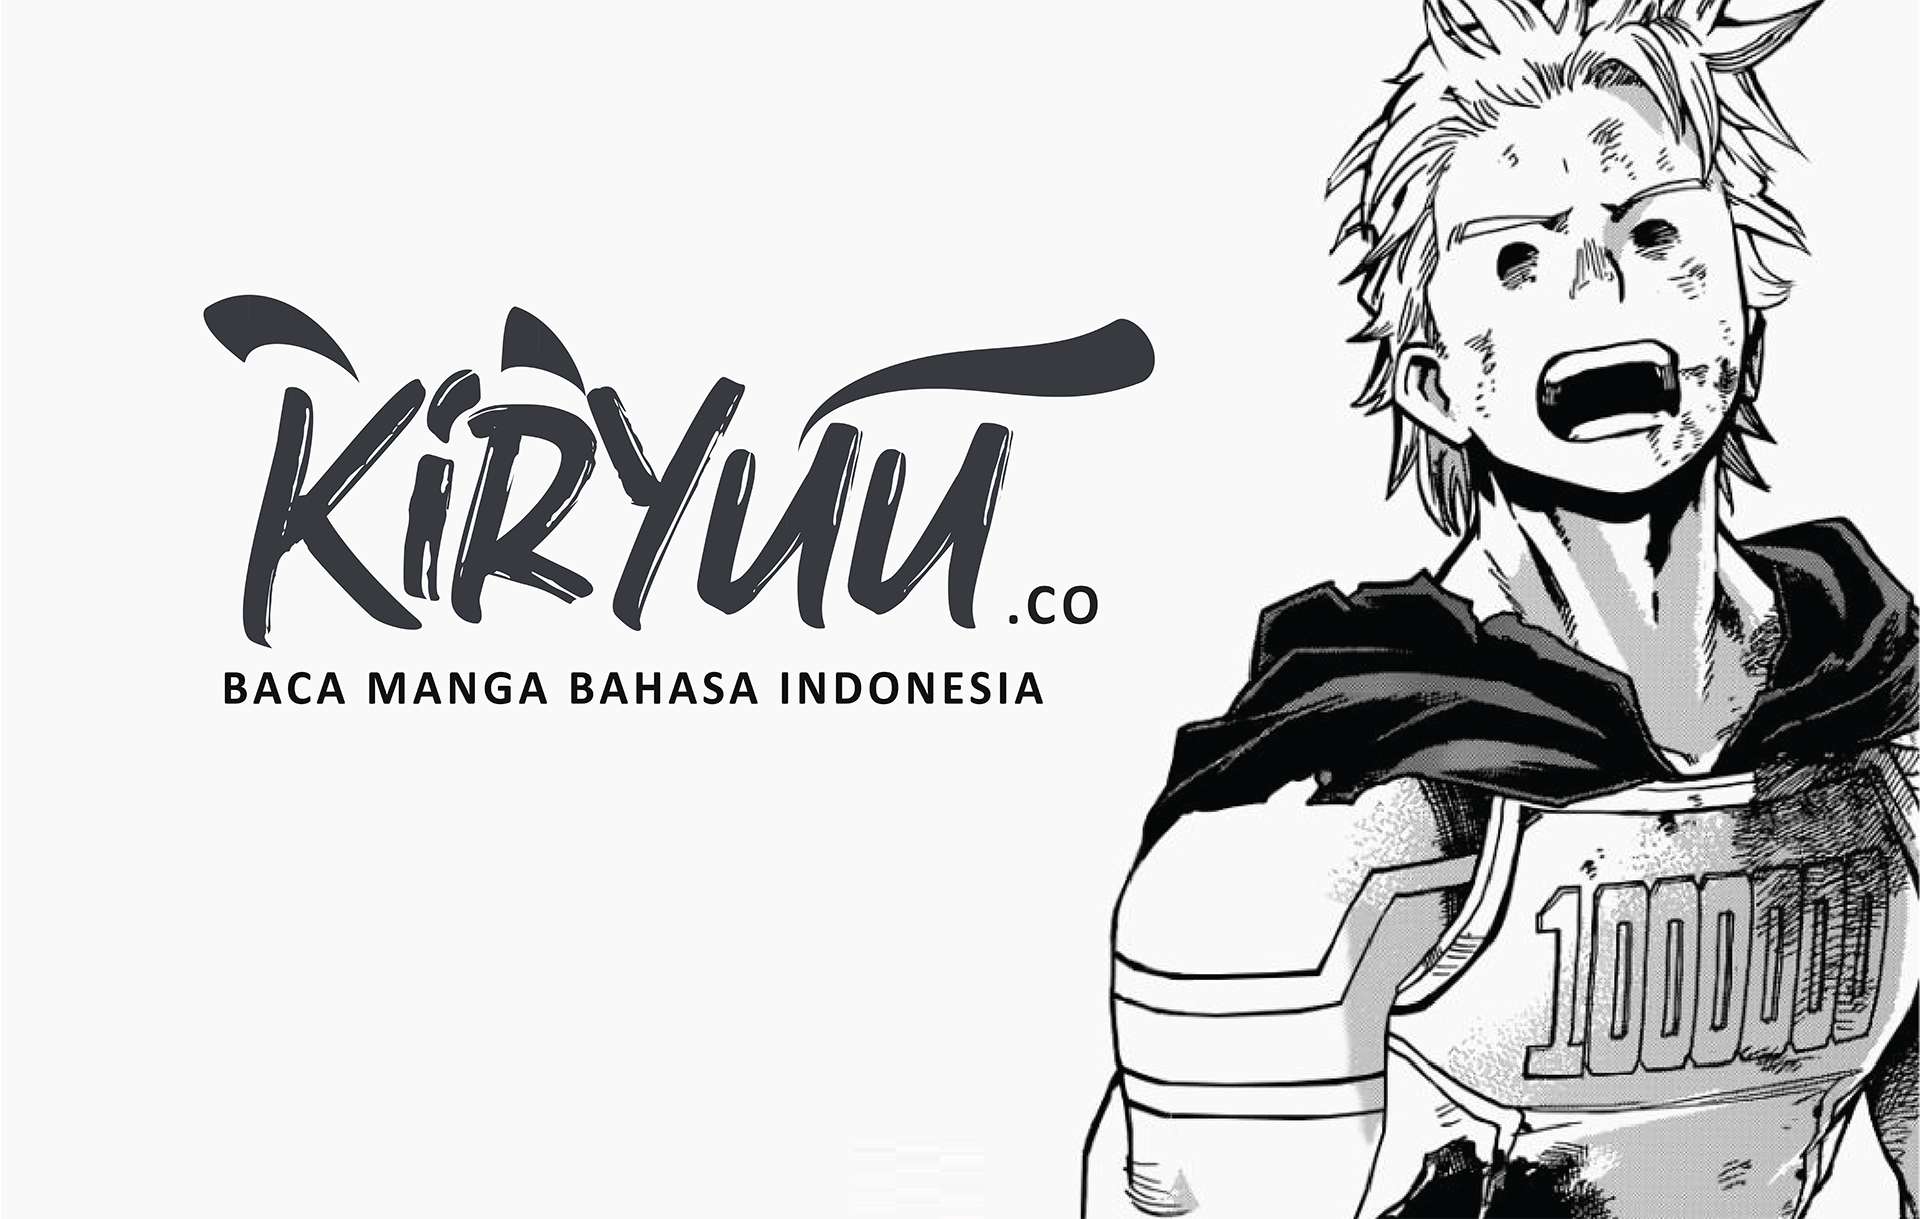 29 to JK Chapter 16 Bahasa Indonesia